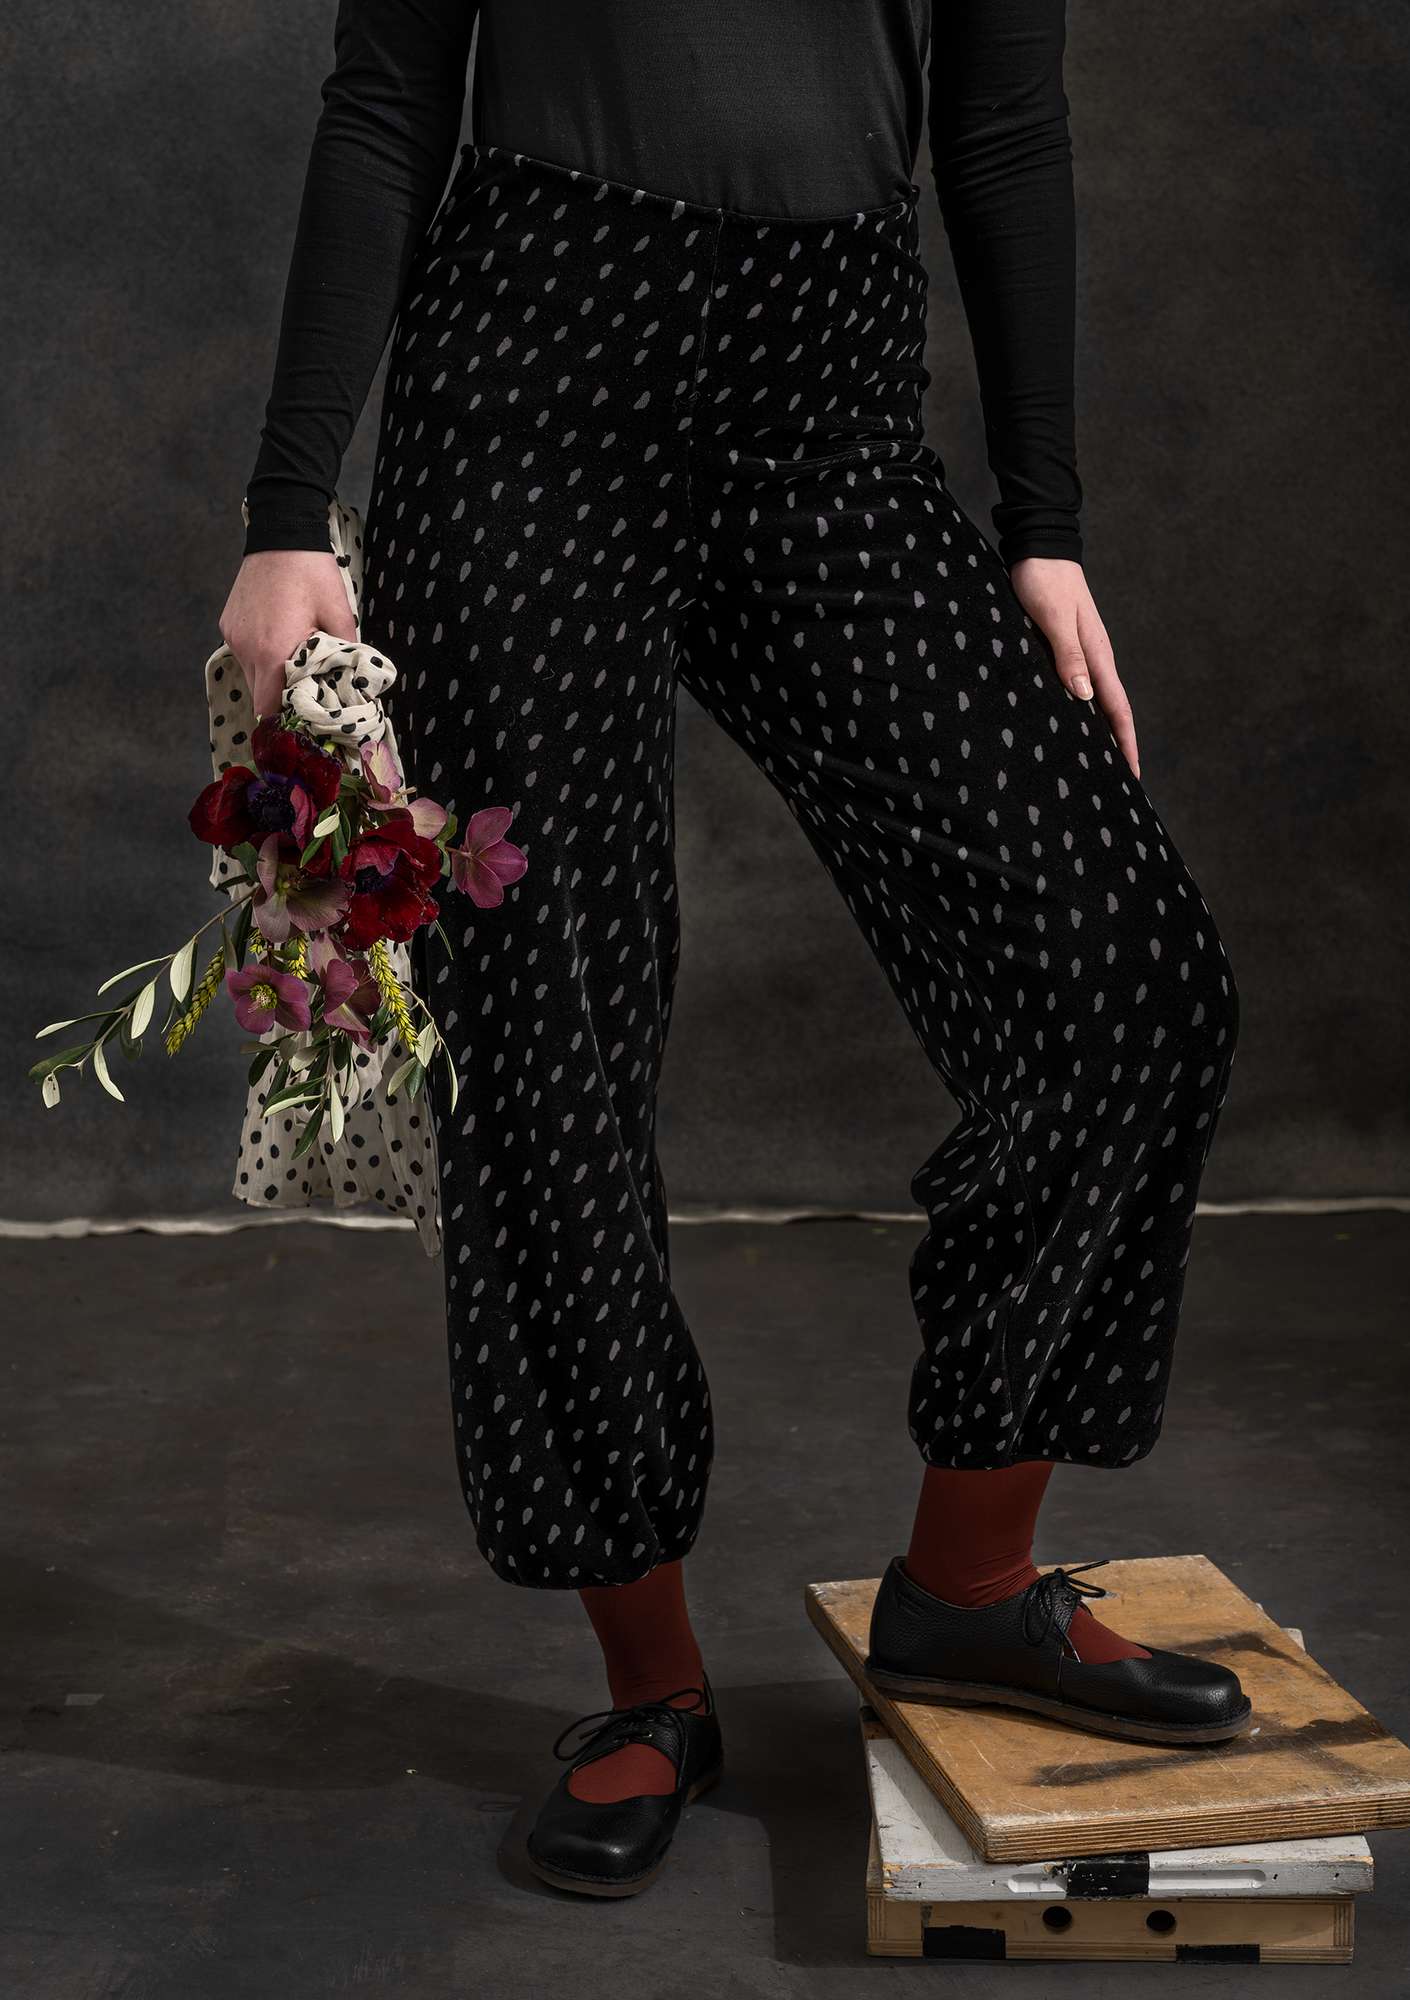 Fauna velour trousers black/patterned